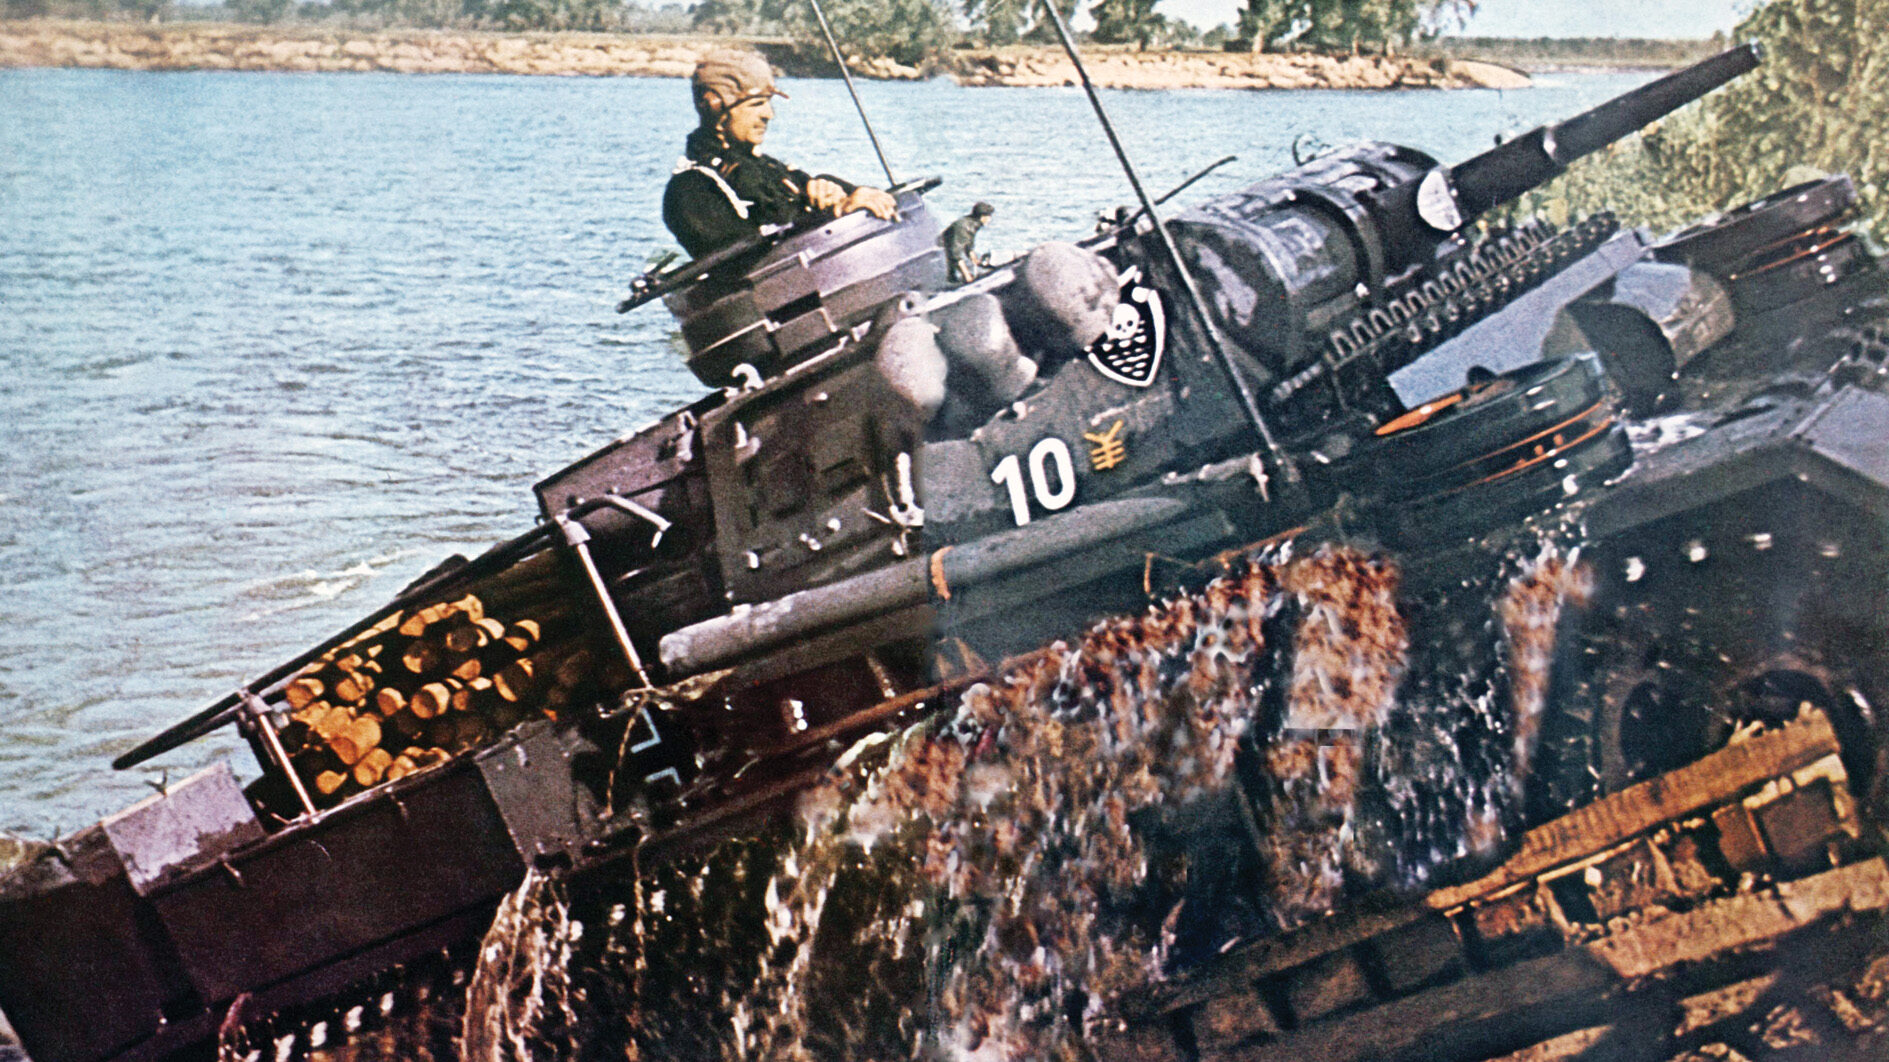 A PzKpfw. III command tank churns through the water of a river somewhere in Russia during Operation Barbarossa. The command tank, or panzerbefehlswagen, of this type was fielded by the 6th and 18th Panzer Regiments during Barbarossa.